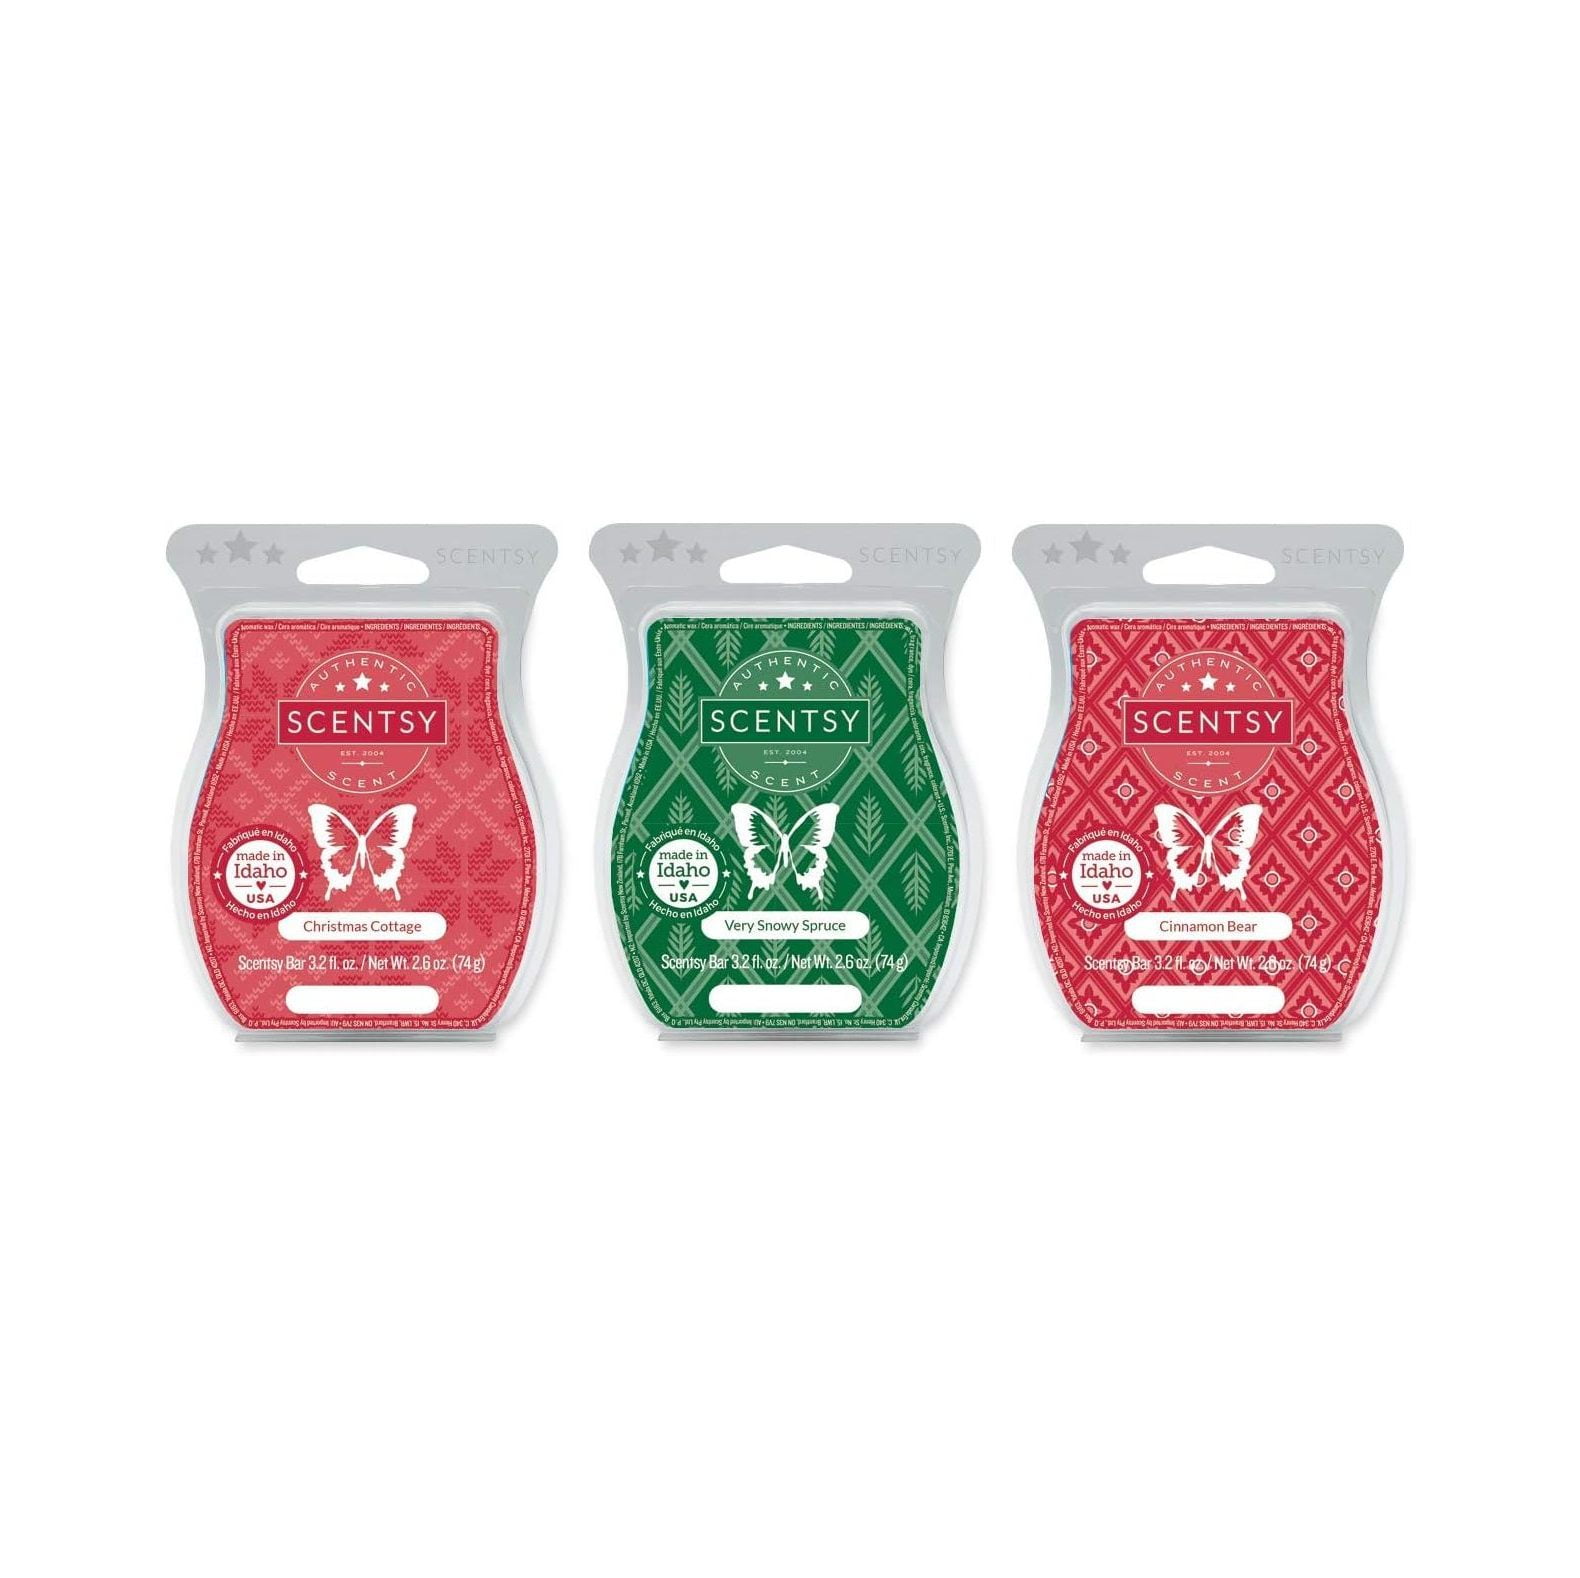 Scentsy Season's Greetings: Christmas Cottage, Very Snowy Spruce